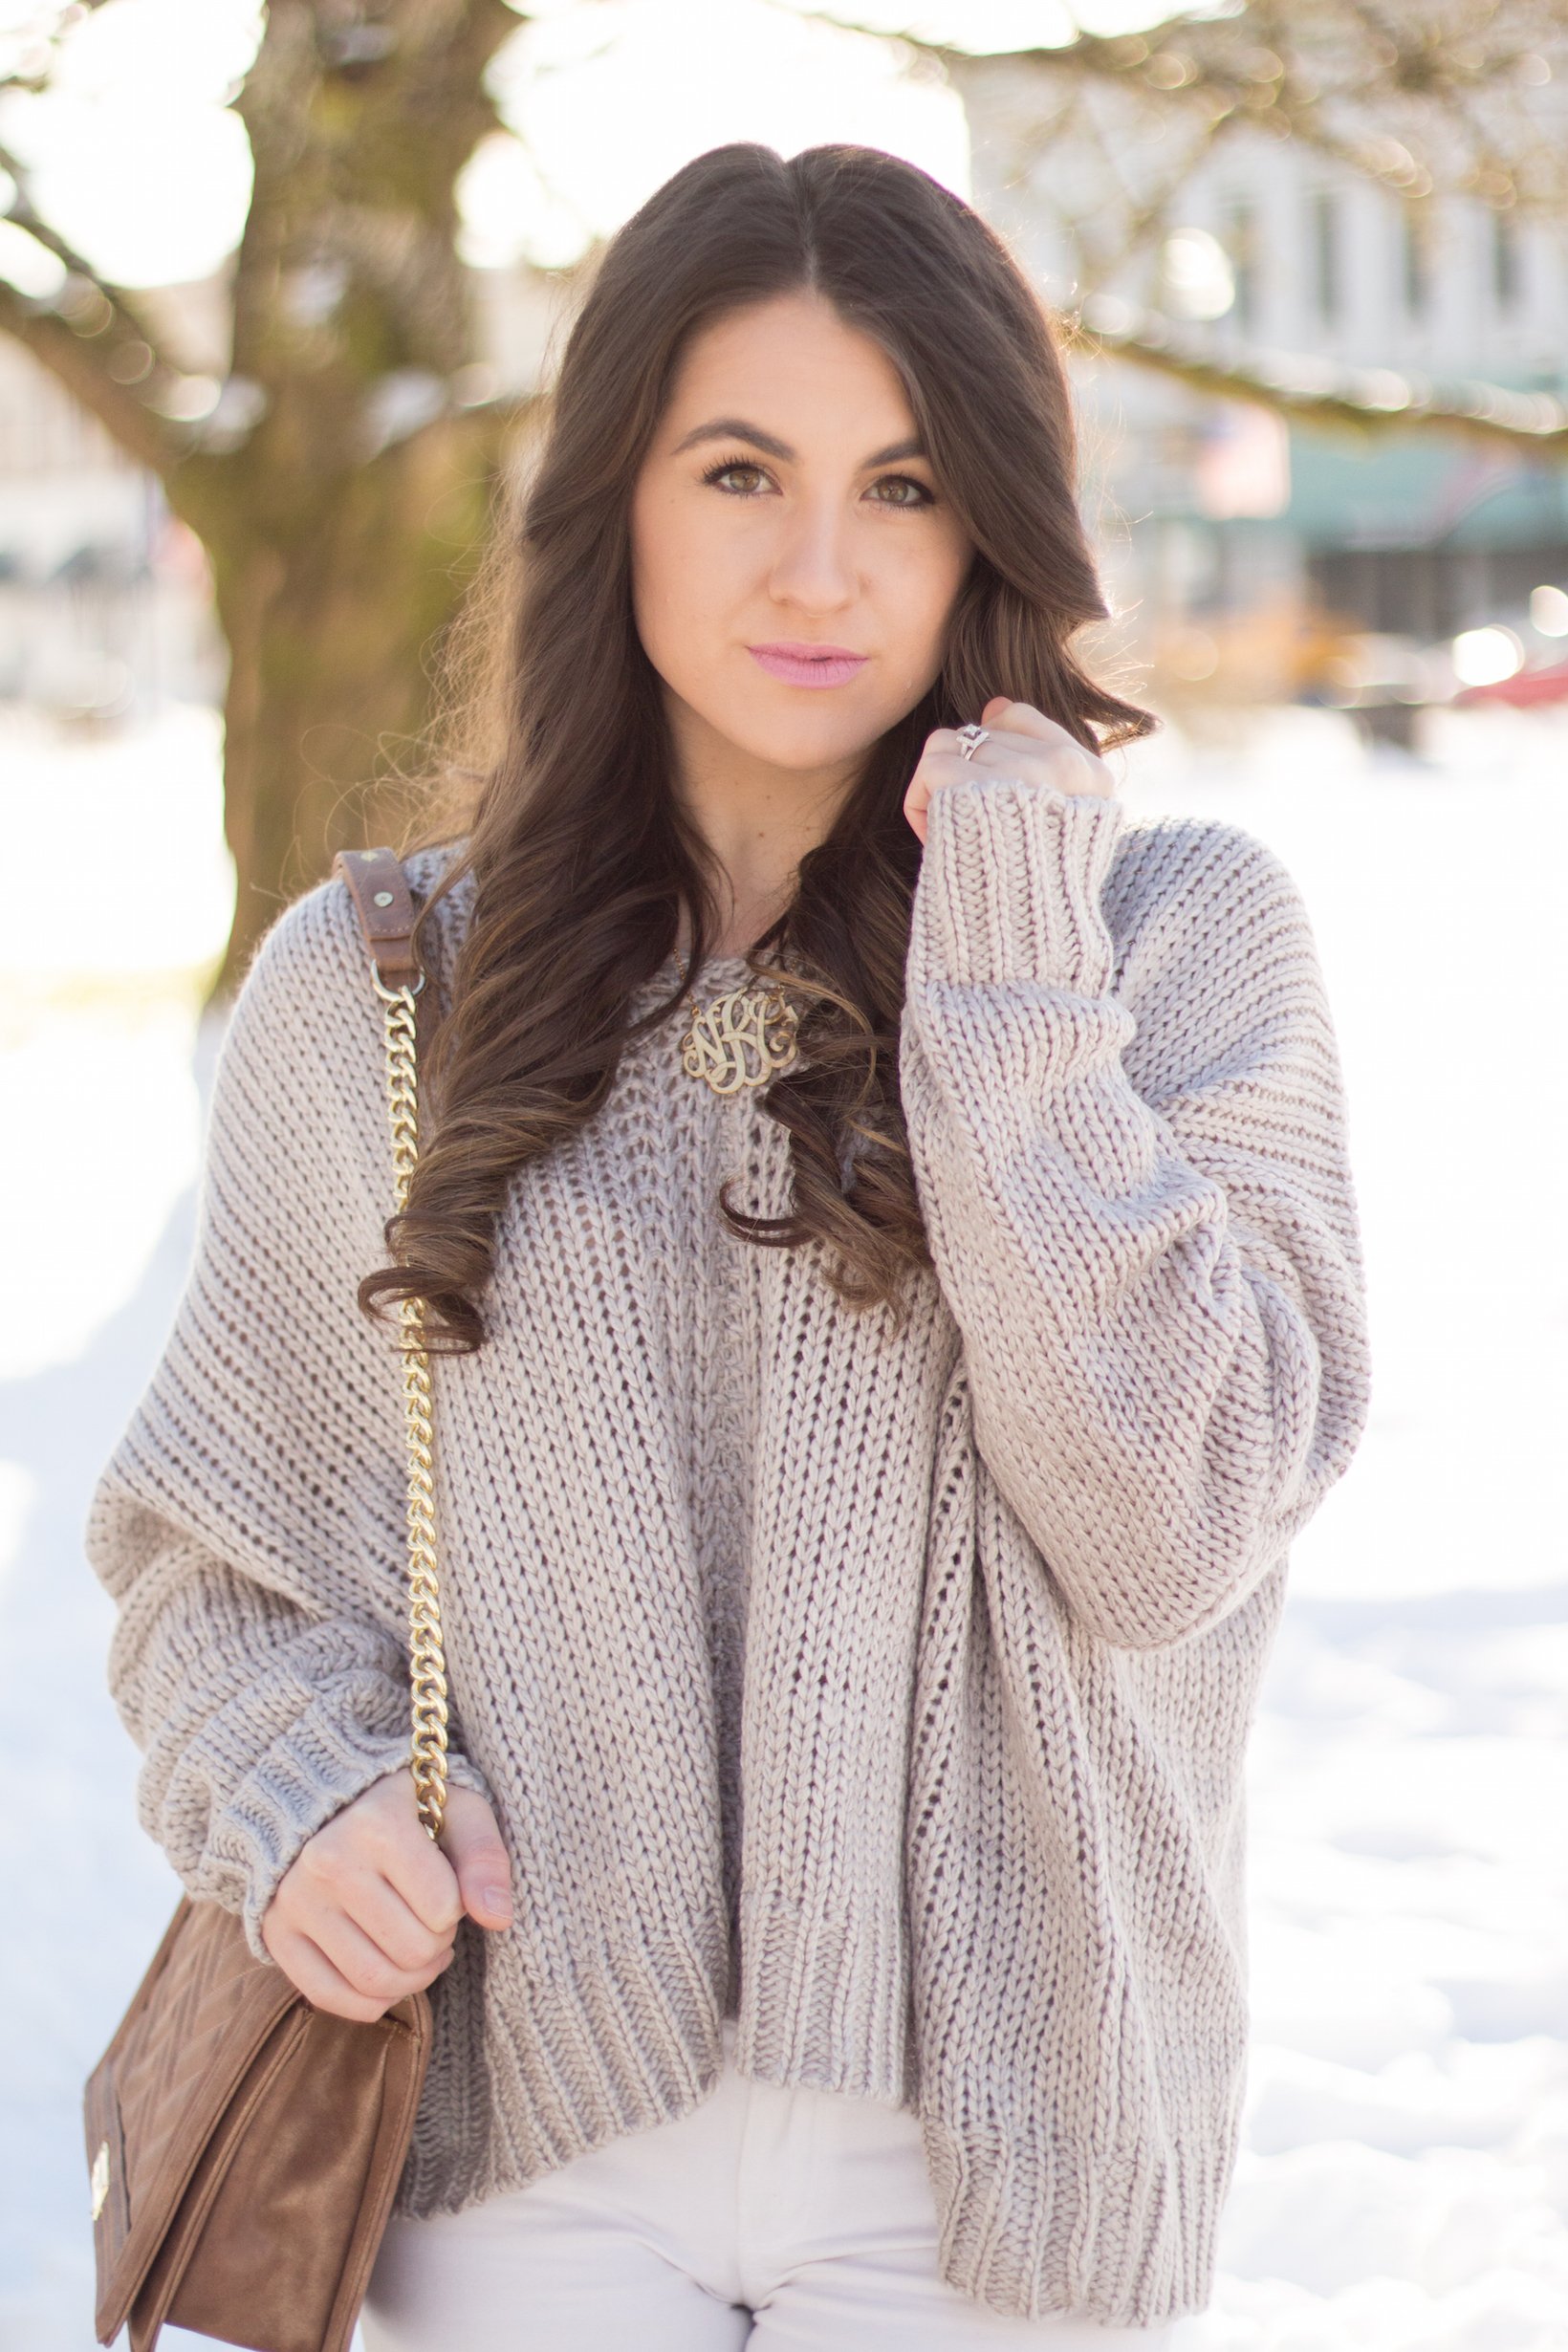 The perfect Winter look in this oversized grey sweater and over the knee boots. 